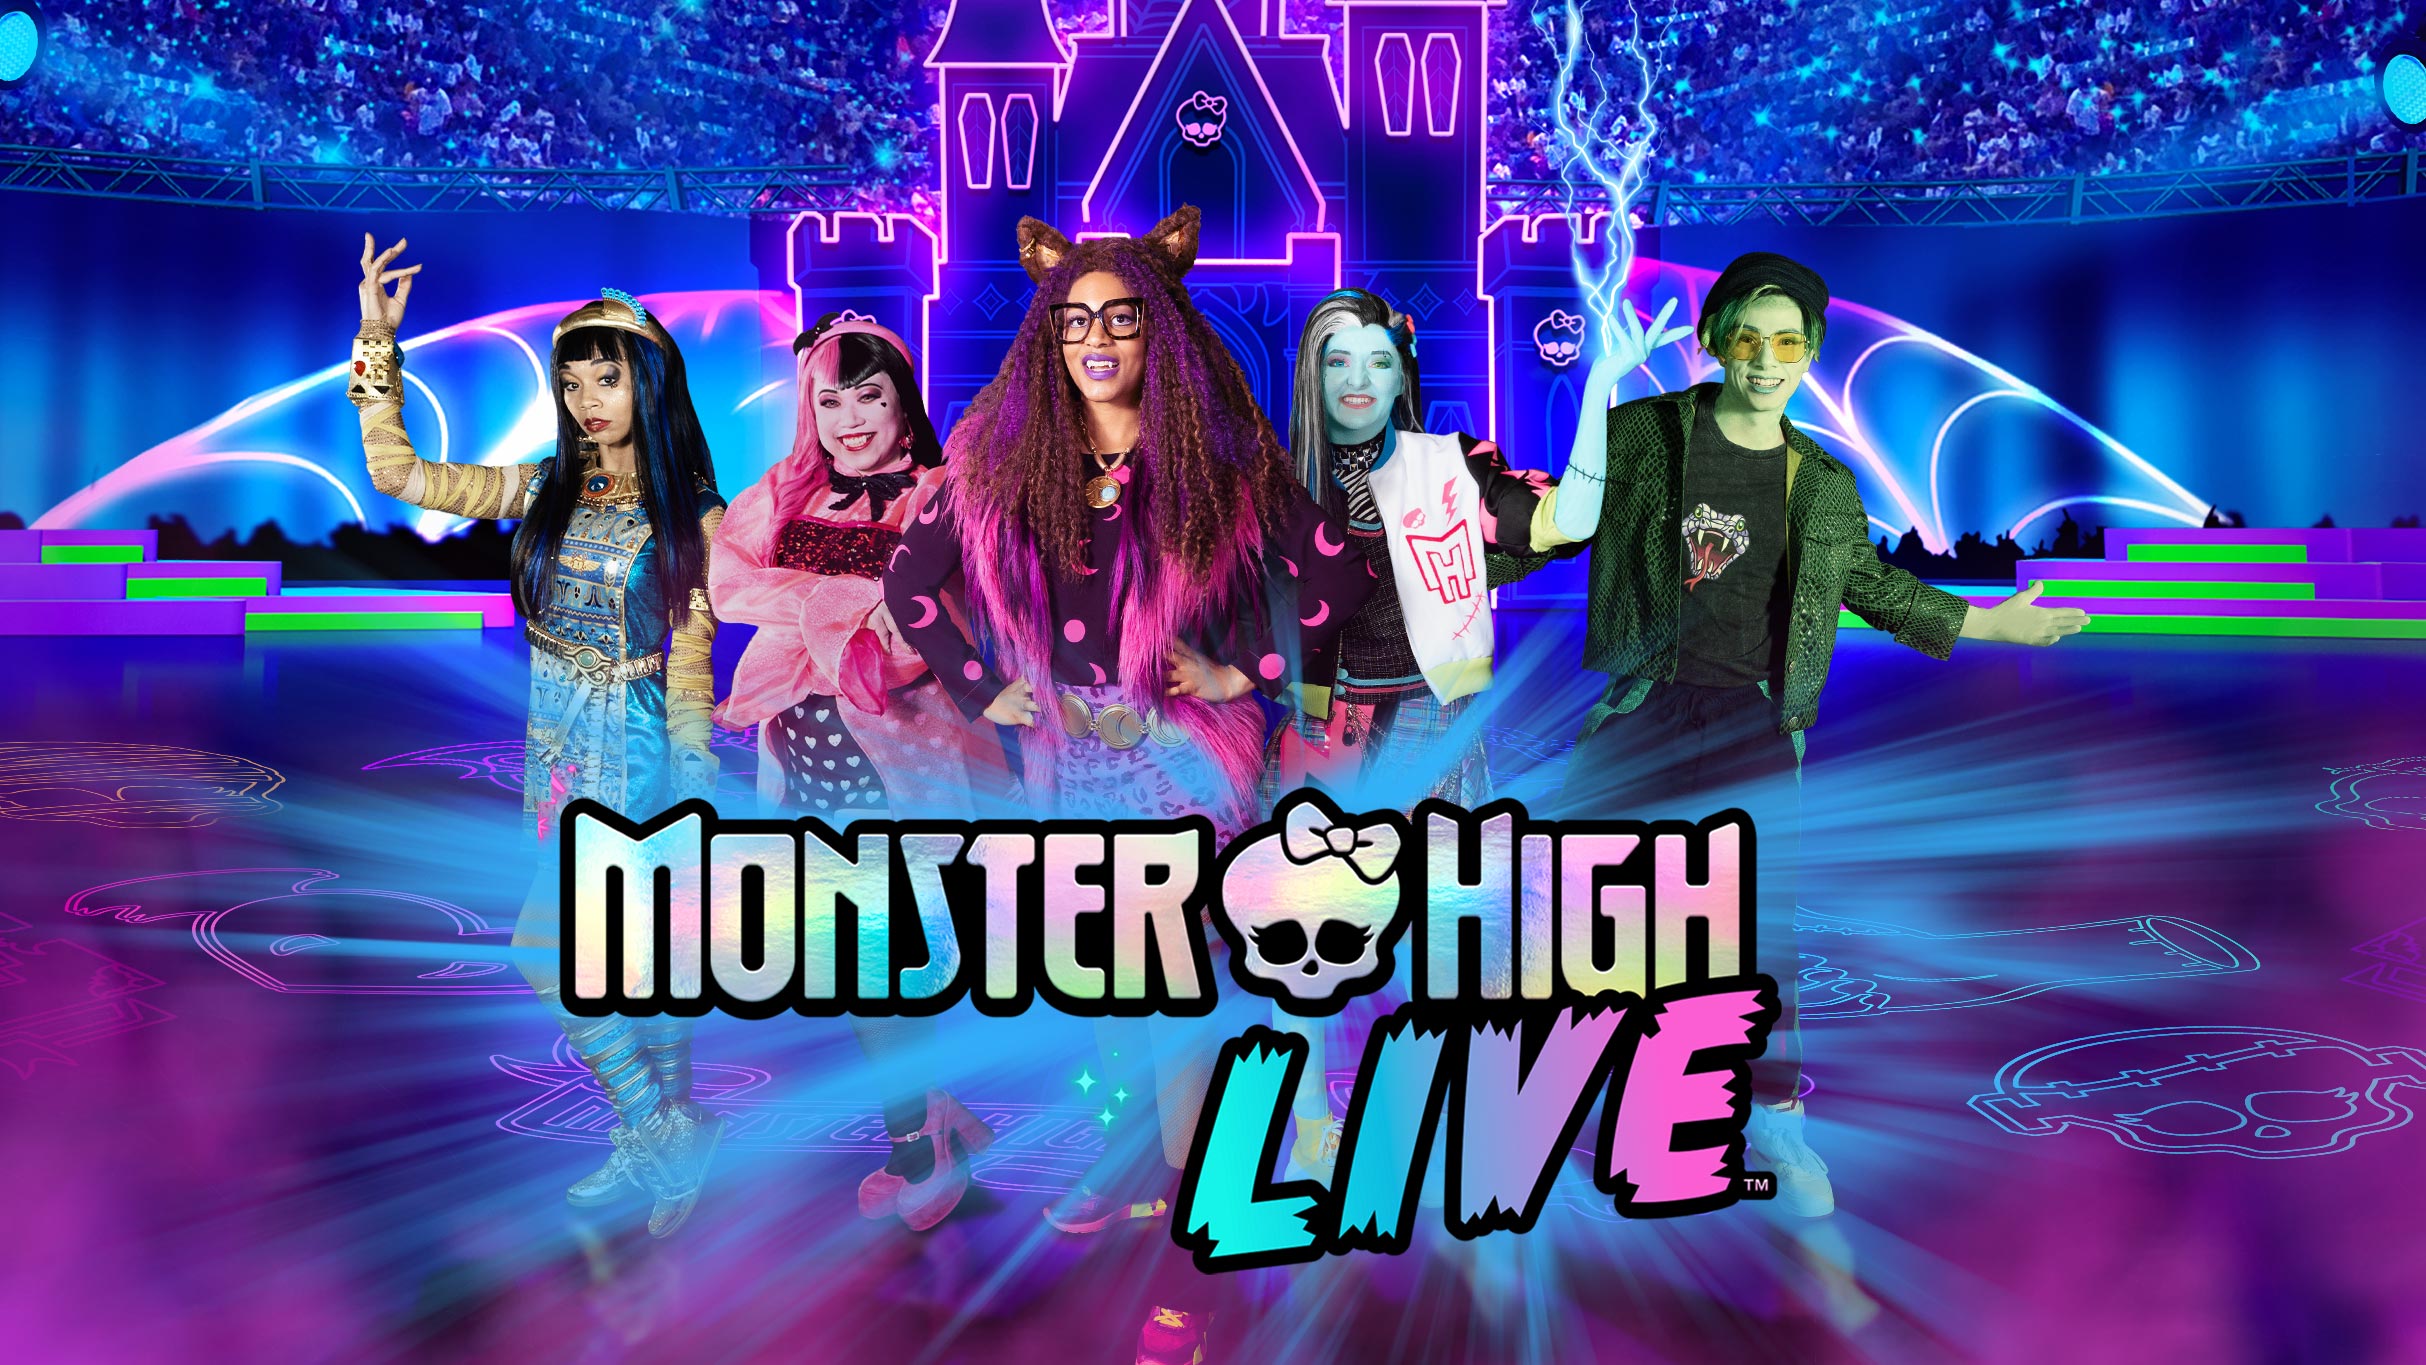 Monster High Live in Peoria promo photo for Mattel presale offer code